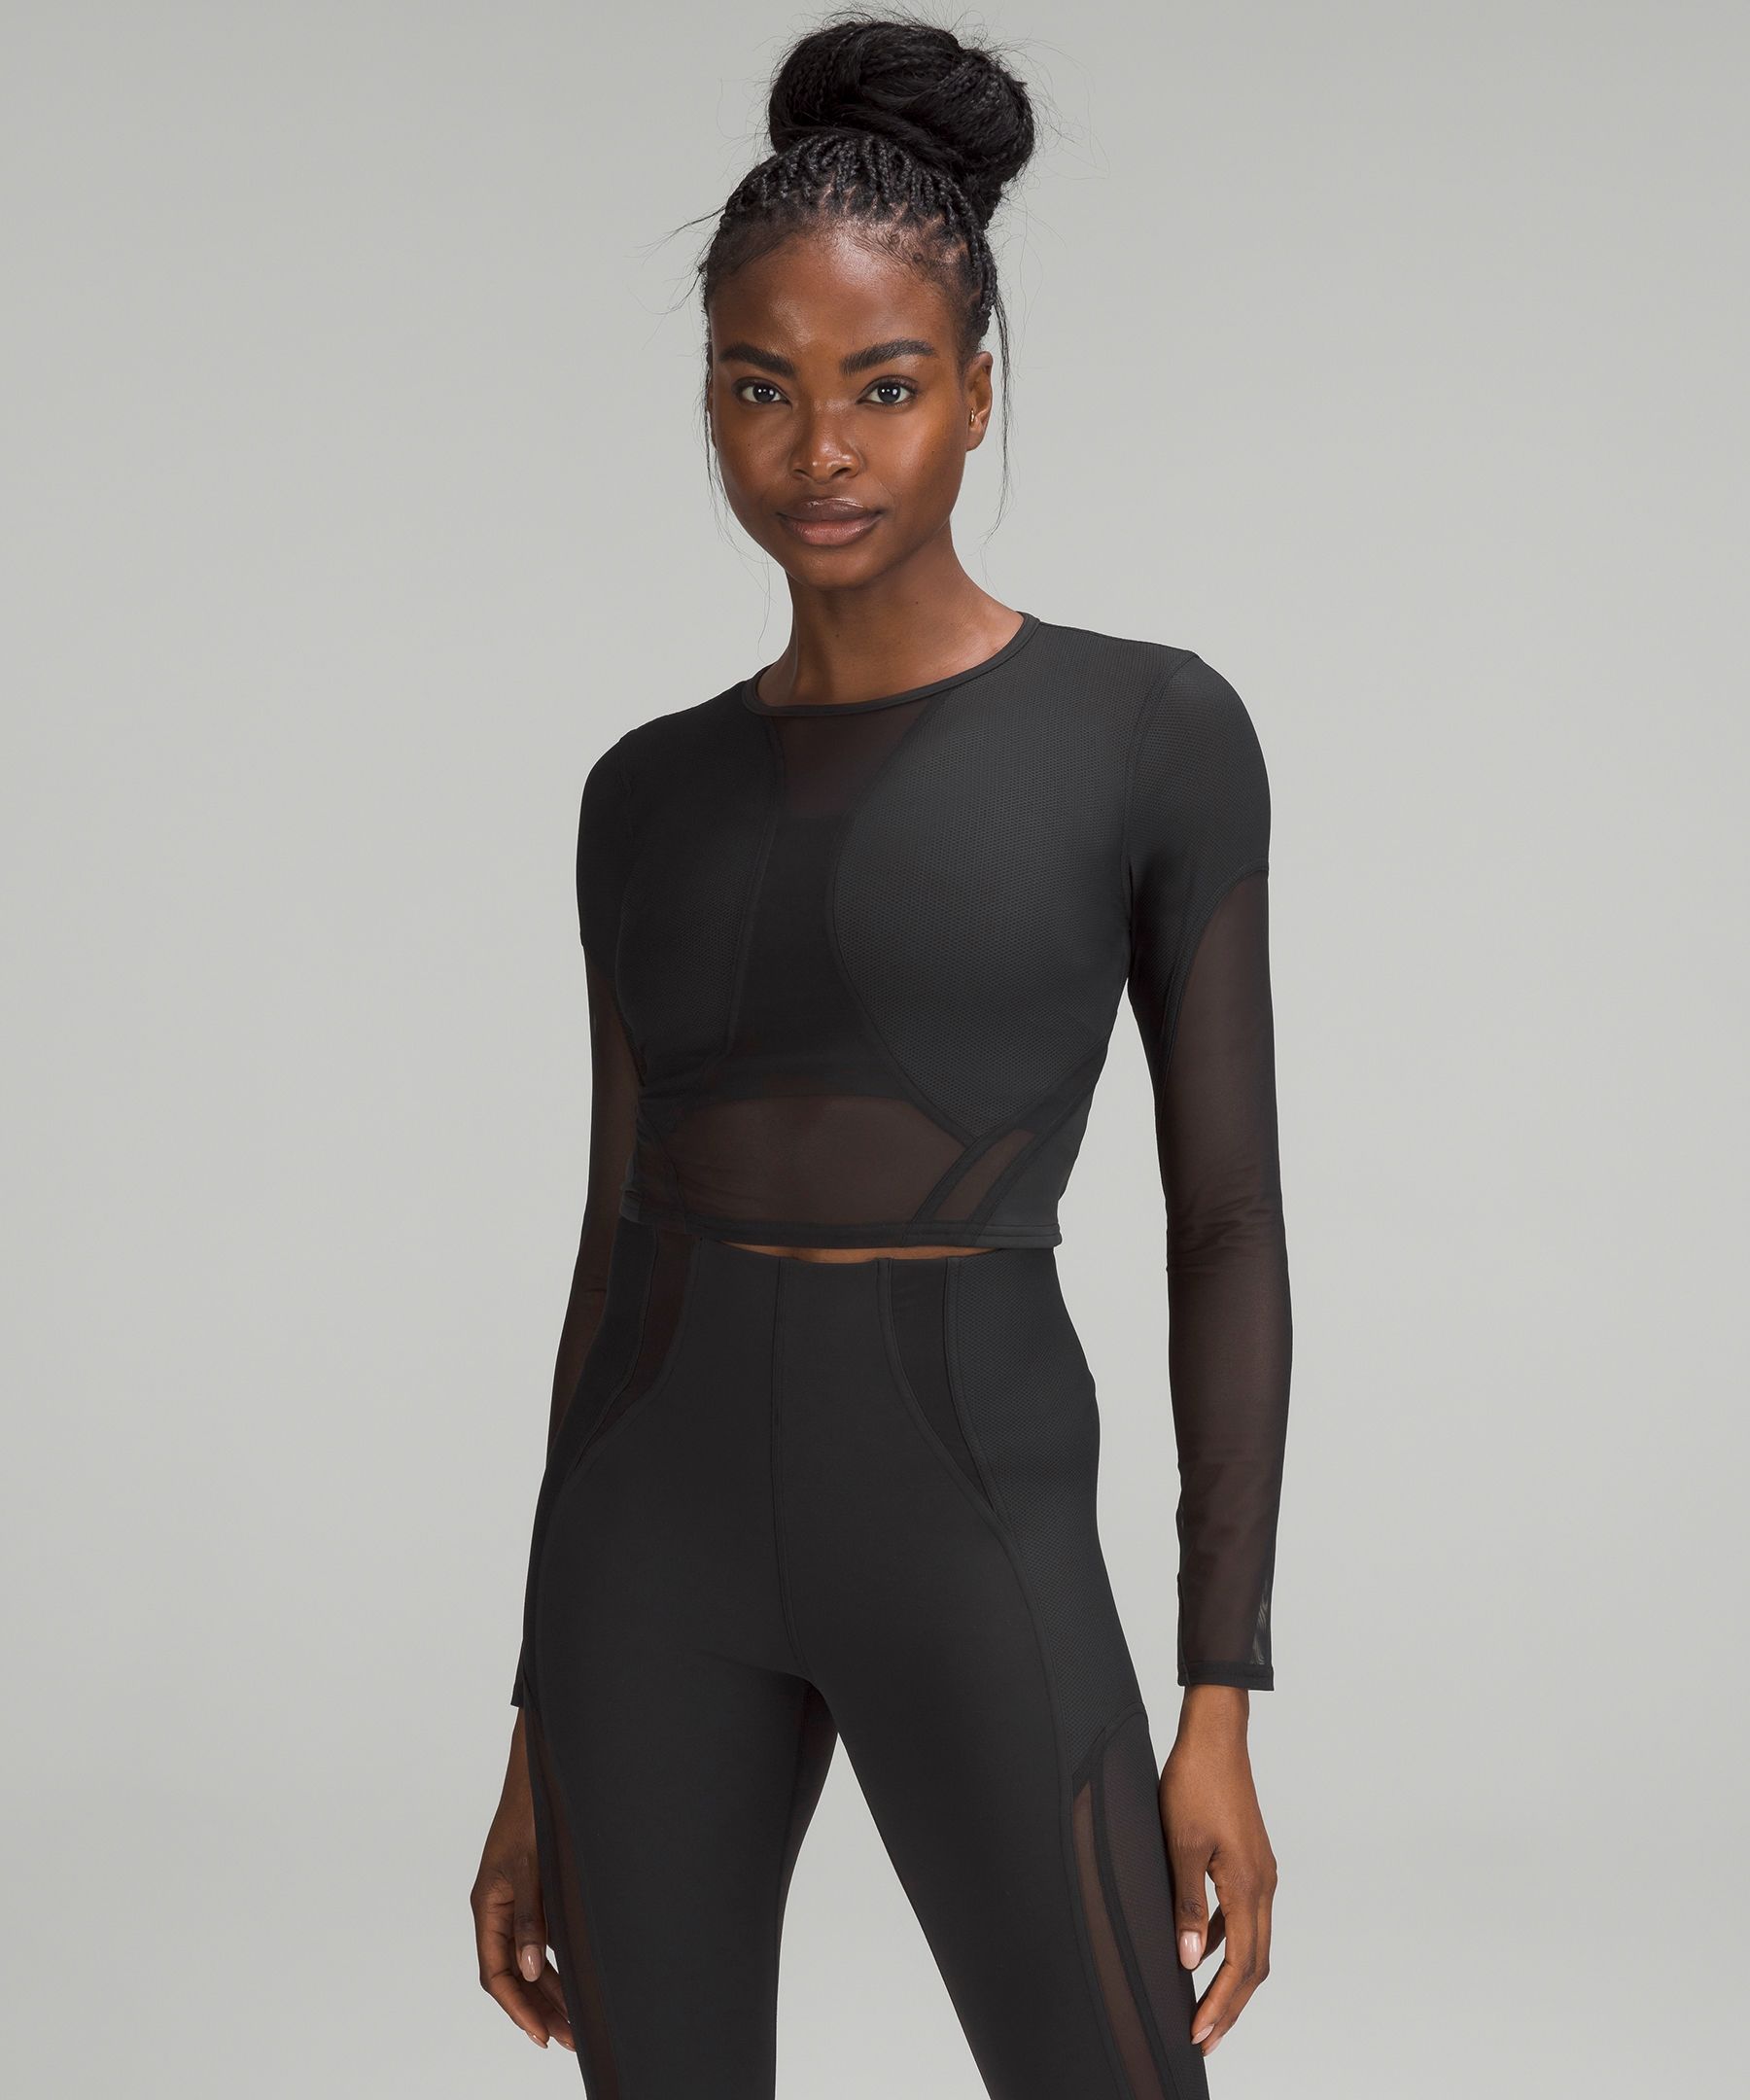 Lululemon Mesh Tech Review & Try on